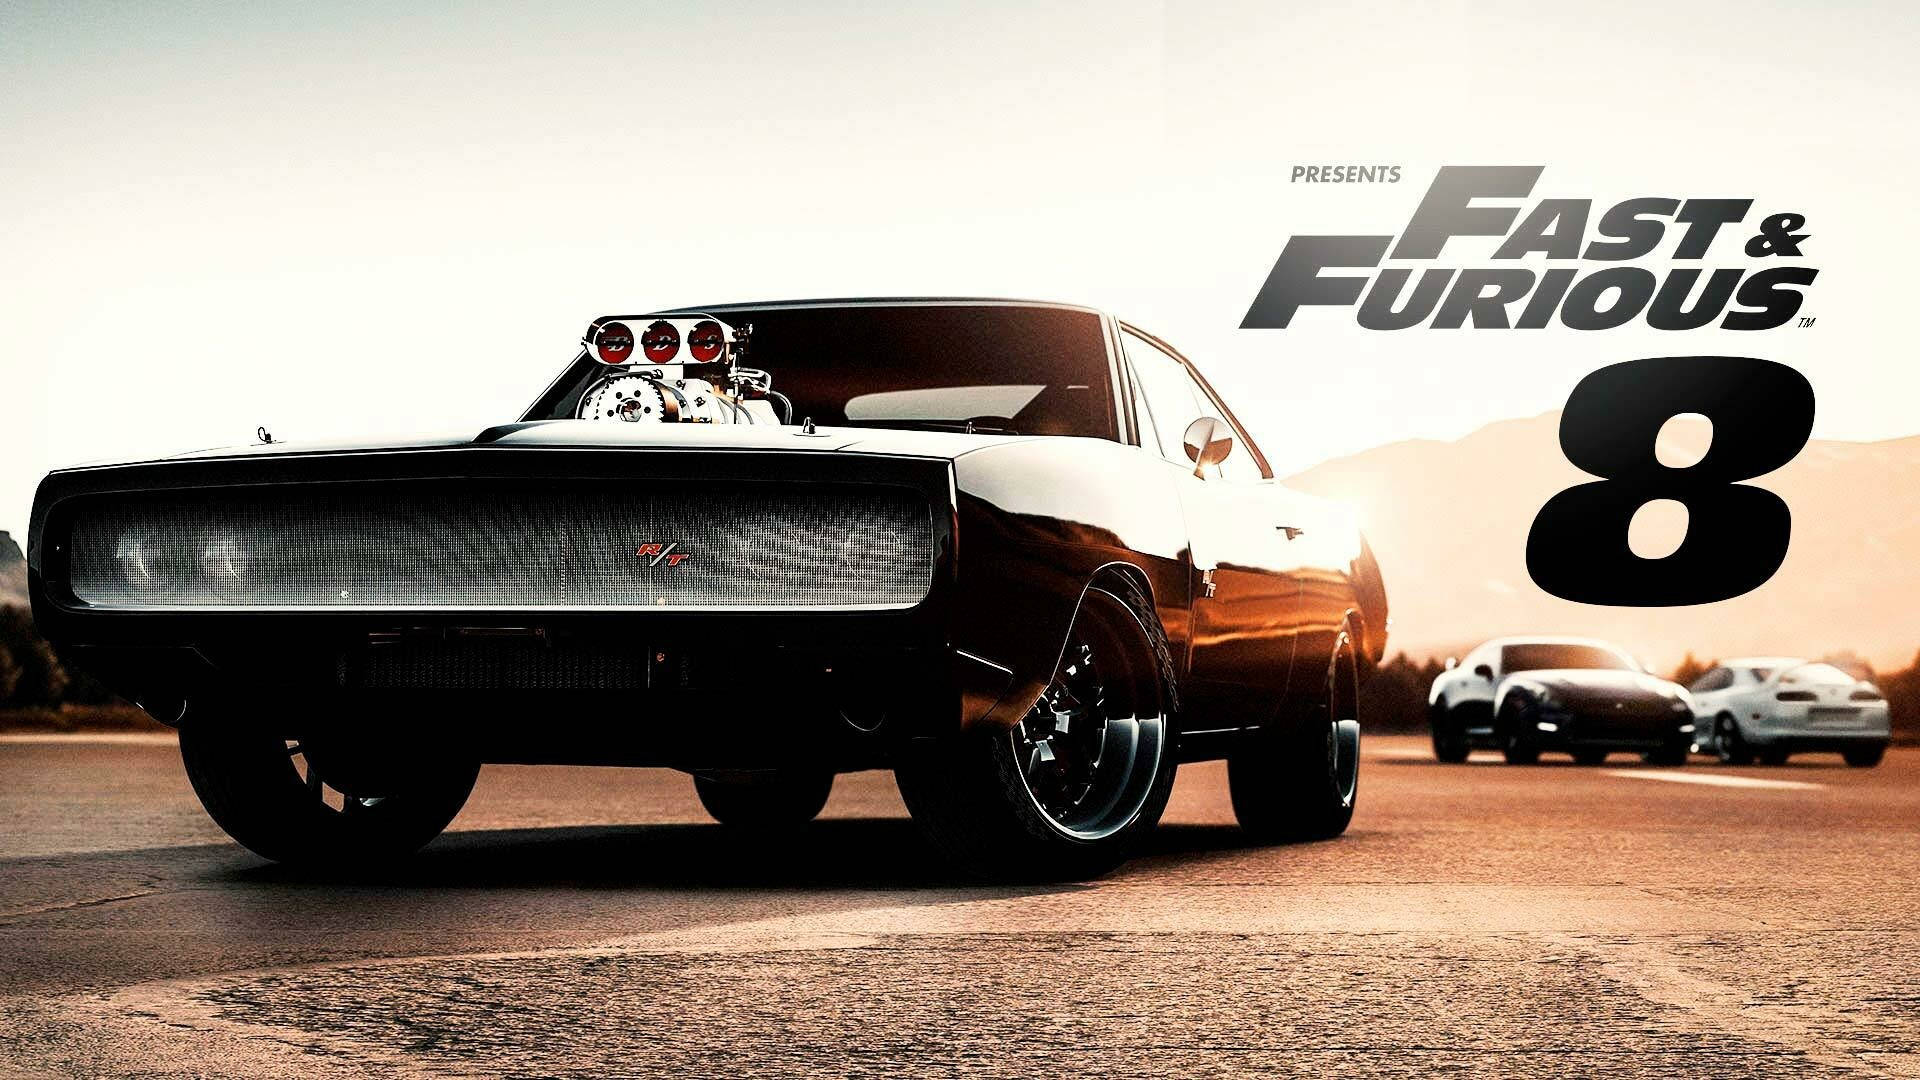 Fast And Furious 8 Cars In Desert Wallpaper